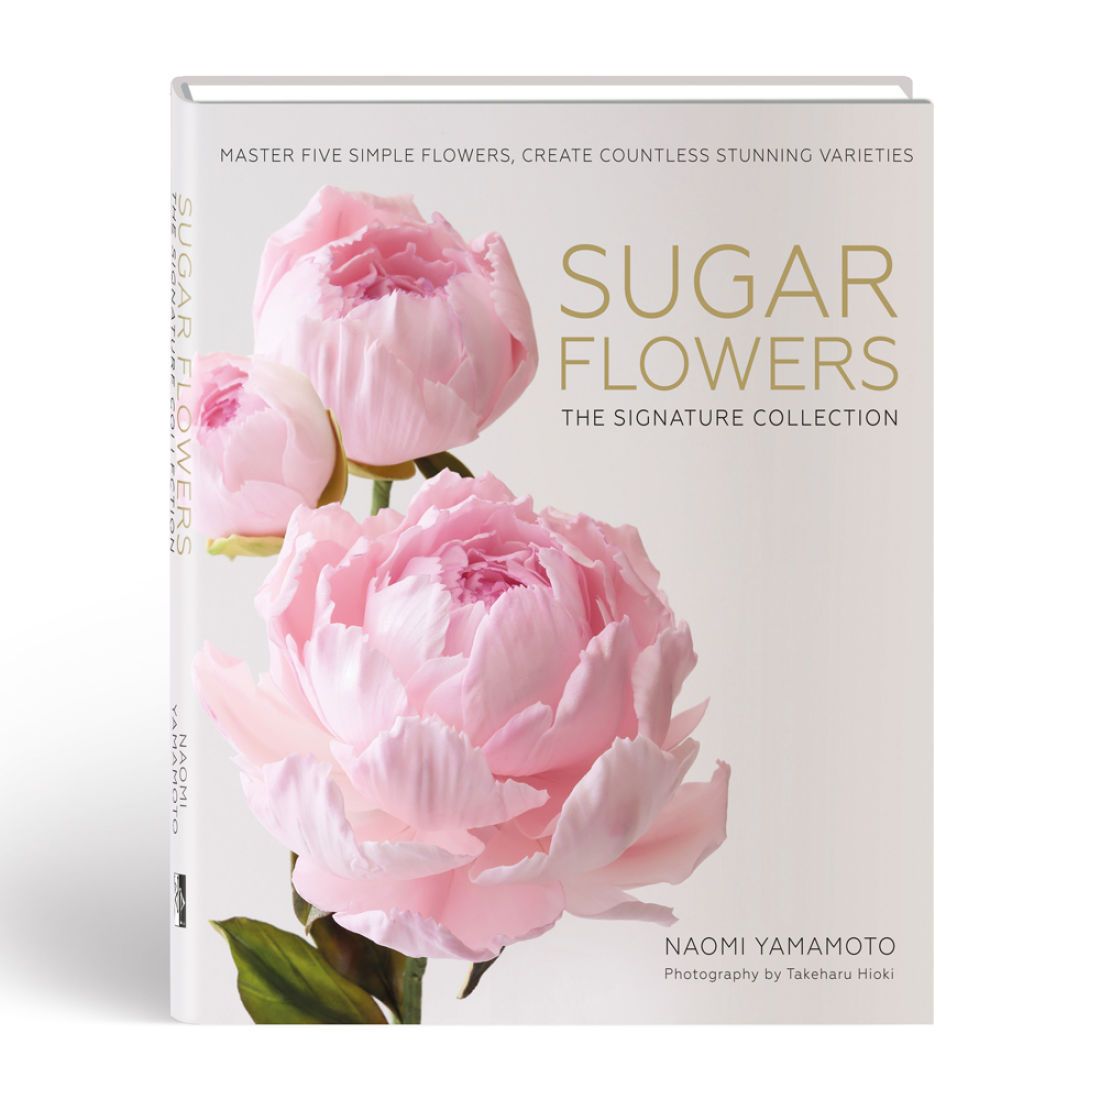 Sugar Flowers - The Signature Collection